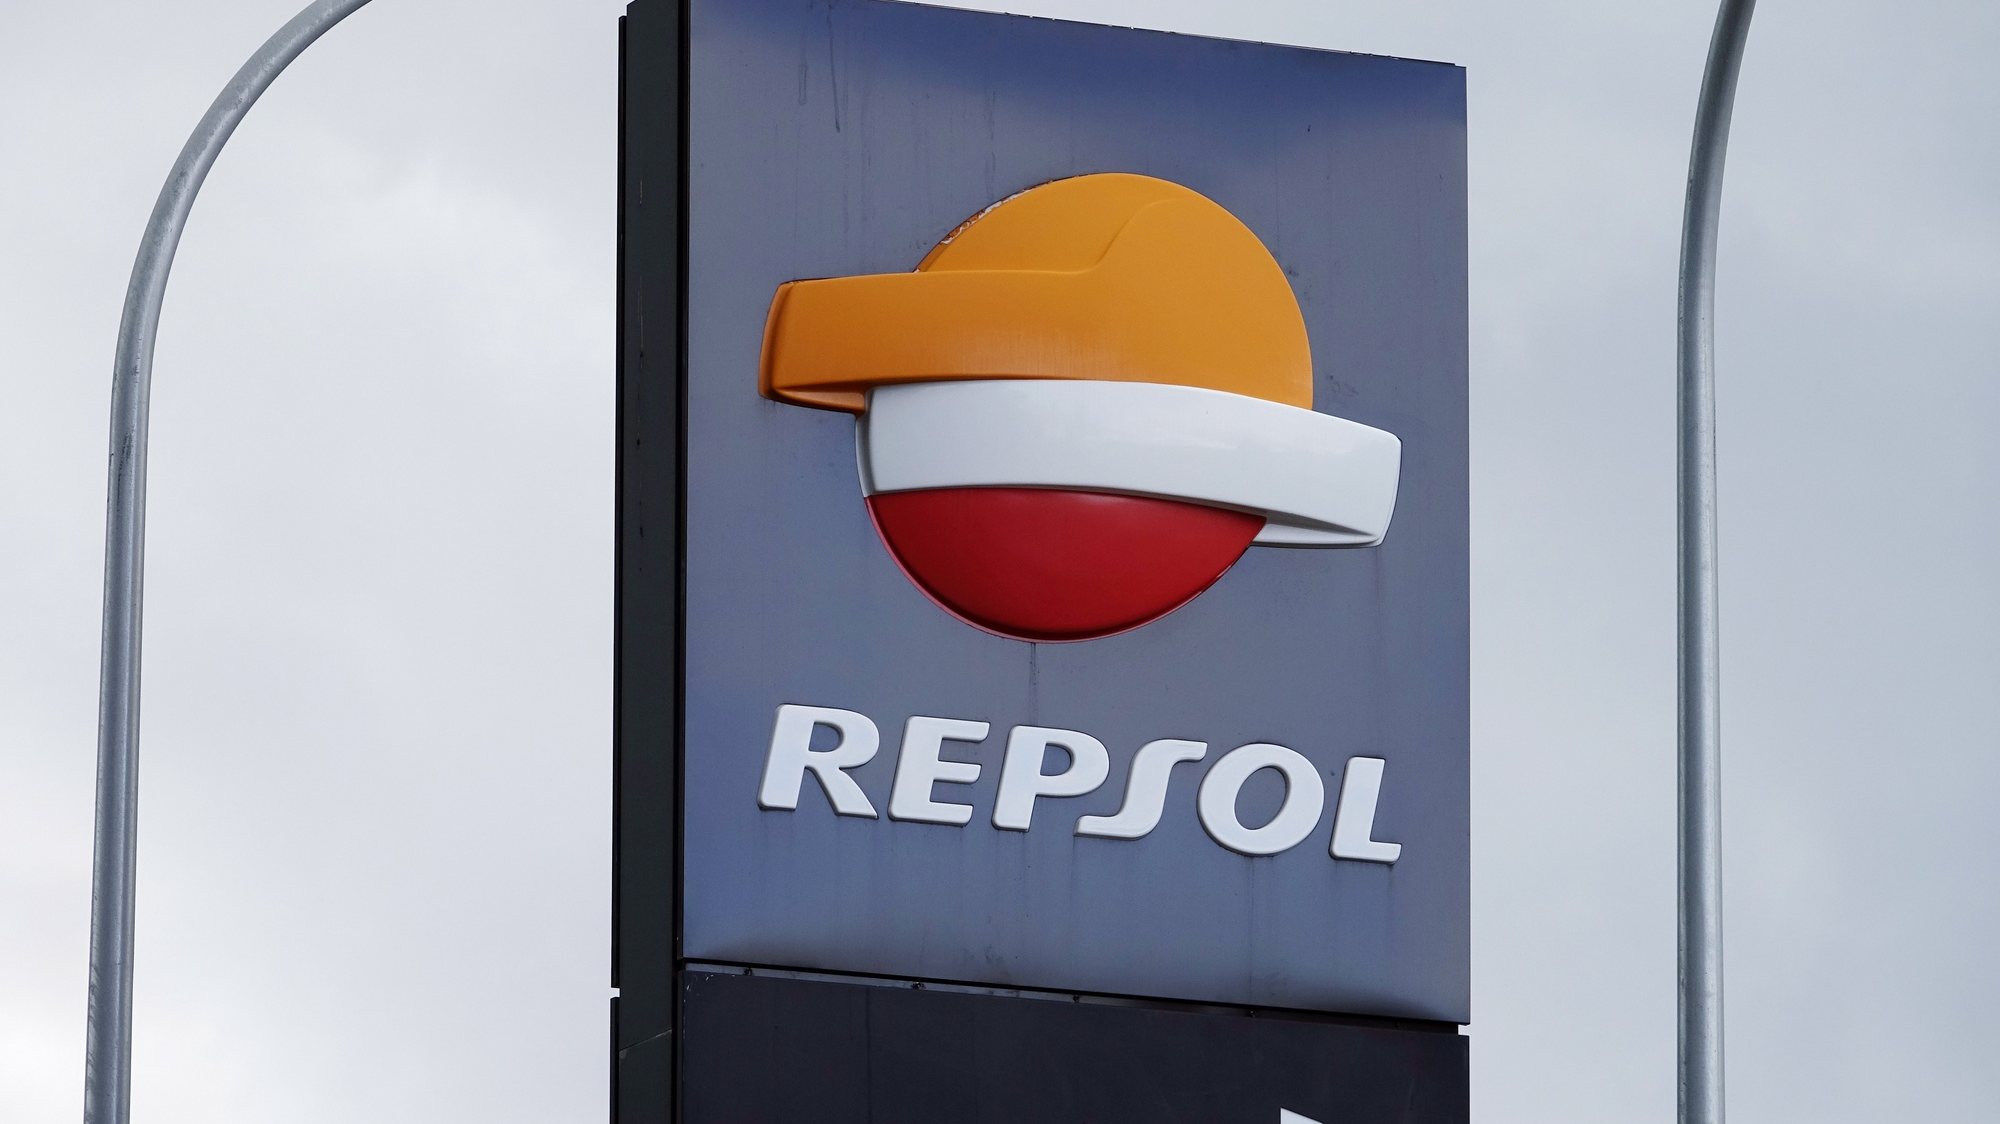 epa08562823 (FILE) - A general view of signage at a Repsol service station in Malaga, Spain, 16 October 2018 (reissued 23 July 2020). Repsol on 23 July 2020 released their first half-year 2020 results saying they posted an adjusted net income of 189 million euros for the first half of 2020 amid the Covid-19, coronavirus pandemic. Repsol said the pandemic that led to a historic fall in oil and gas prices resulted in a negative impact of 1.088 billion euros on the companys inventories as the company adjusted its price curves that in turn affected the book value of its Upstream assets and is reflected in special item results of -1.585 billion euros. As a result of the above, net income in the first half-year stood at -2.484 billion euros.  EPA/MAURITZ ANTIN *** Local Caption *** 54740854